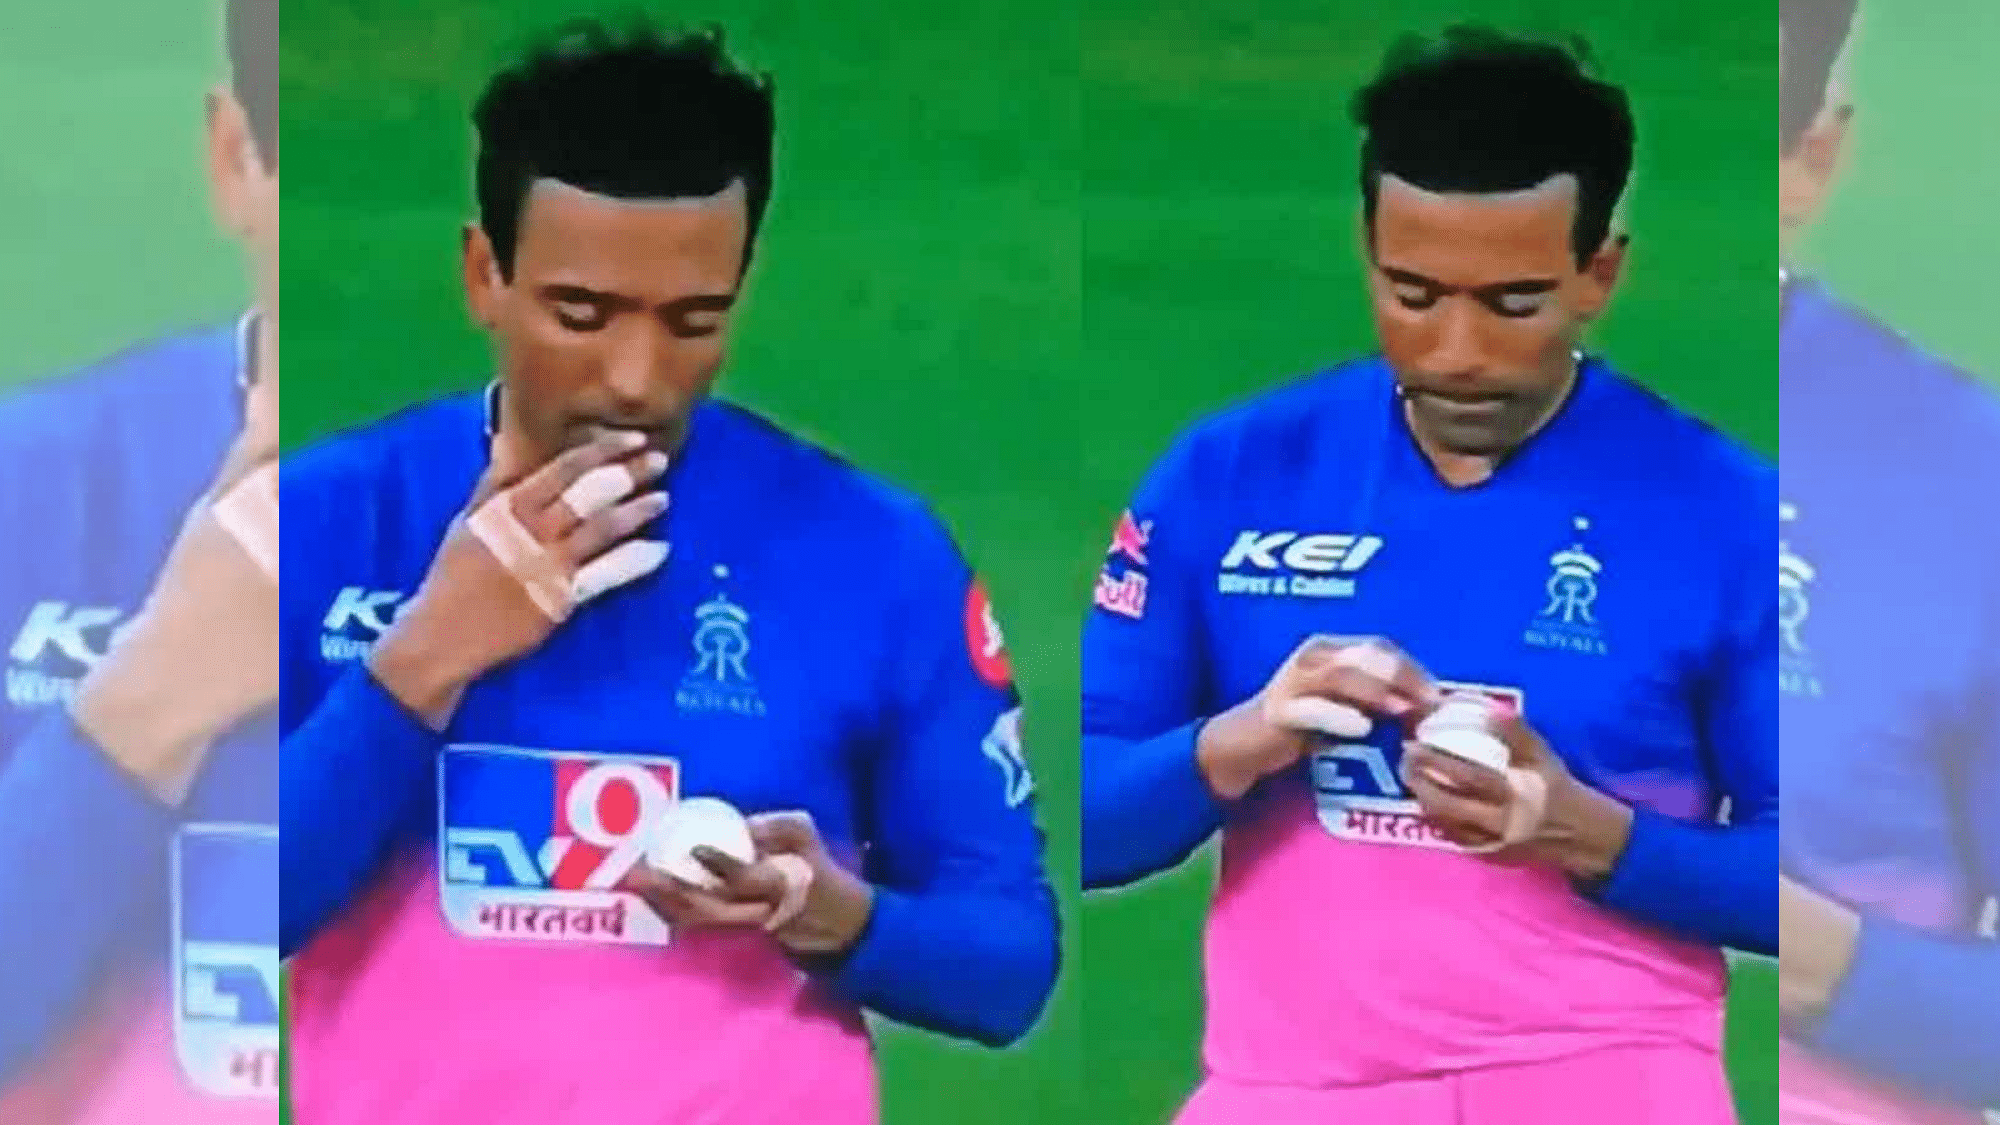 Robin Uthappa was seen to be using saliva on the cricket ball, during the IPL match between Rajasthan Royals and KKR.